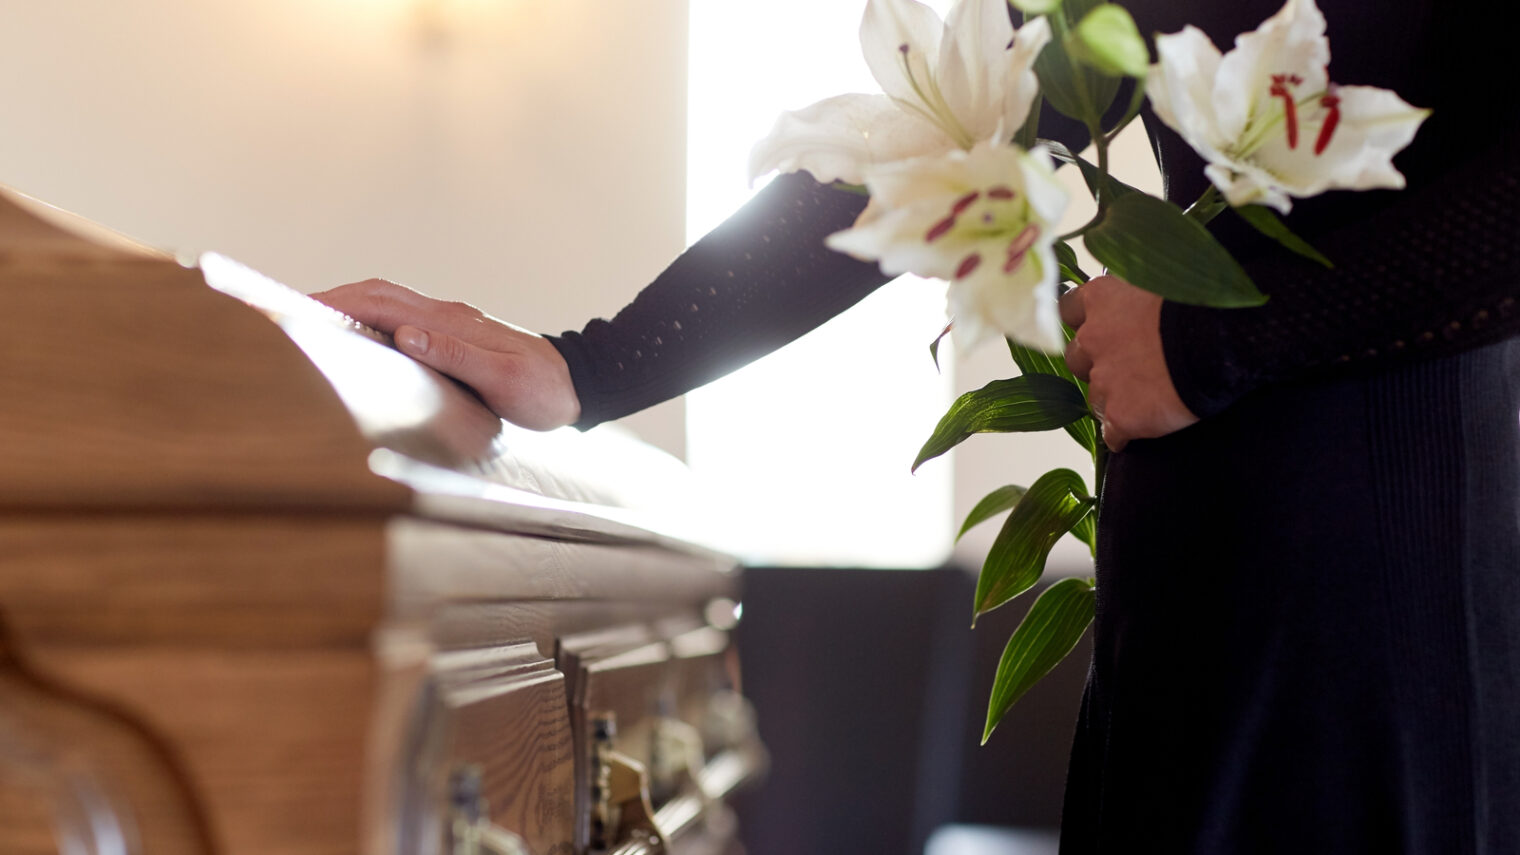 The funeral is often just the start of a long and difficult process. Photo by Shutterstock